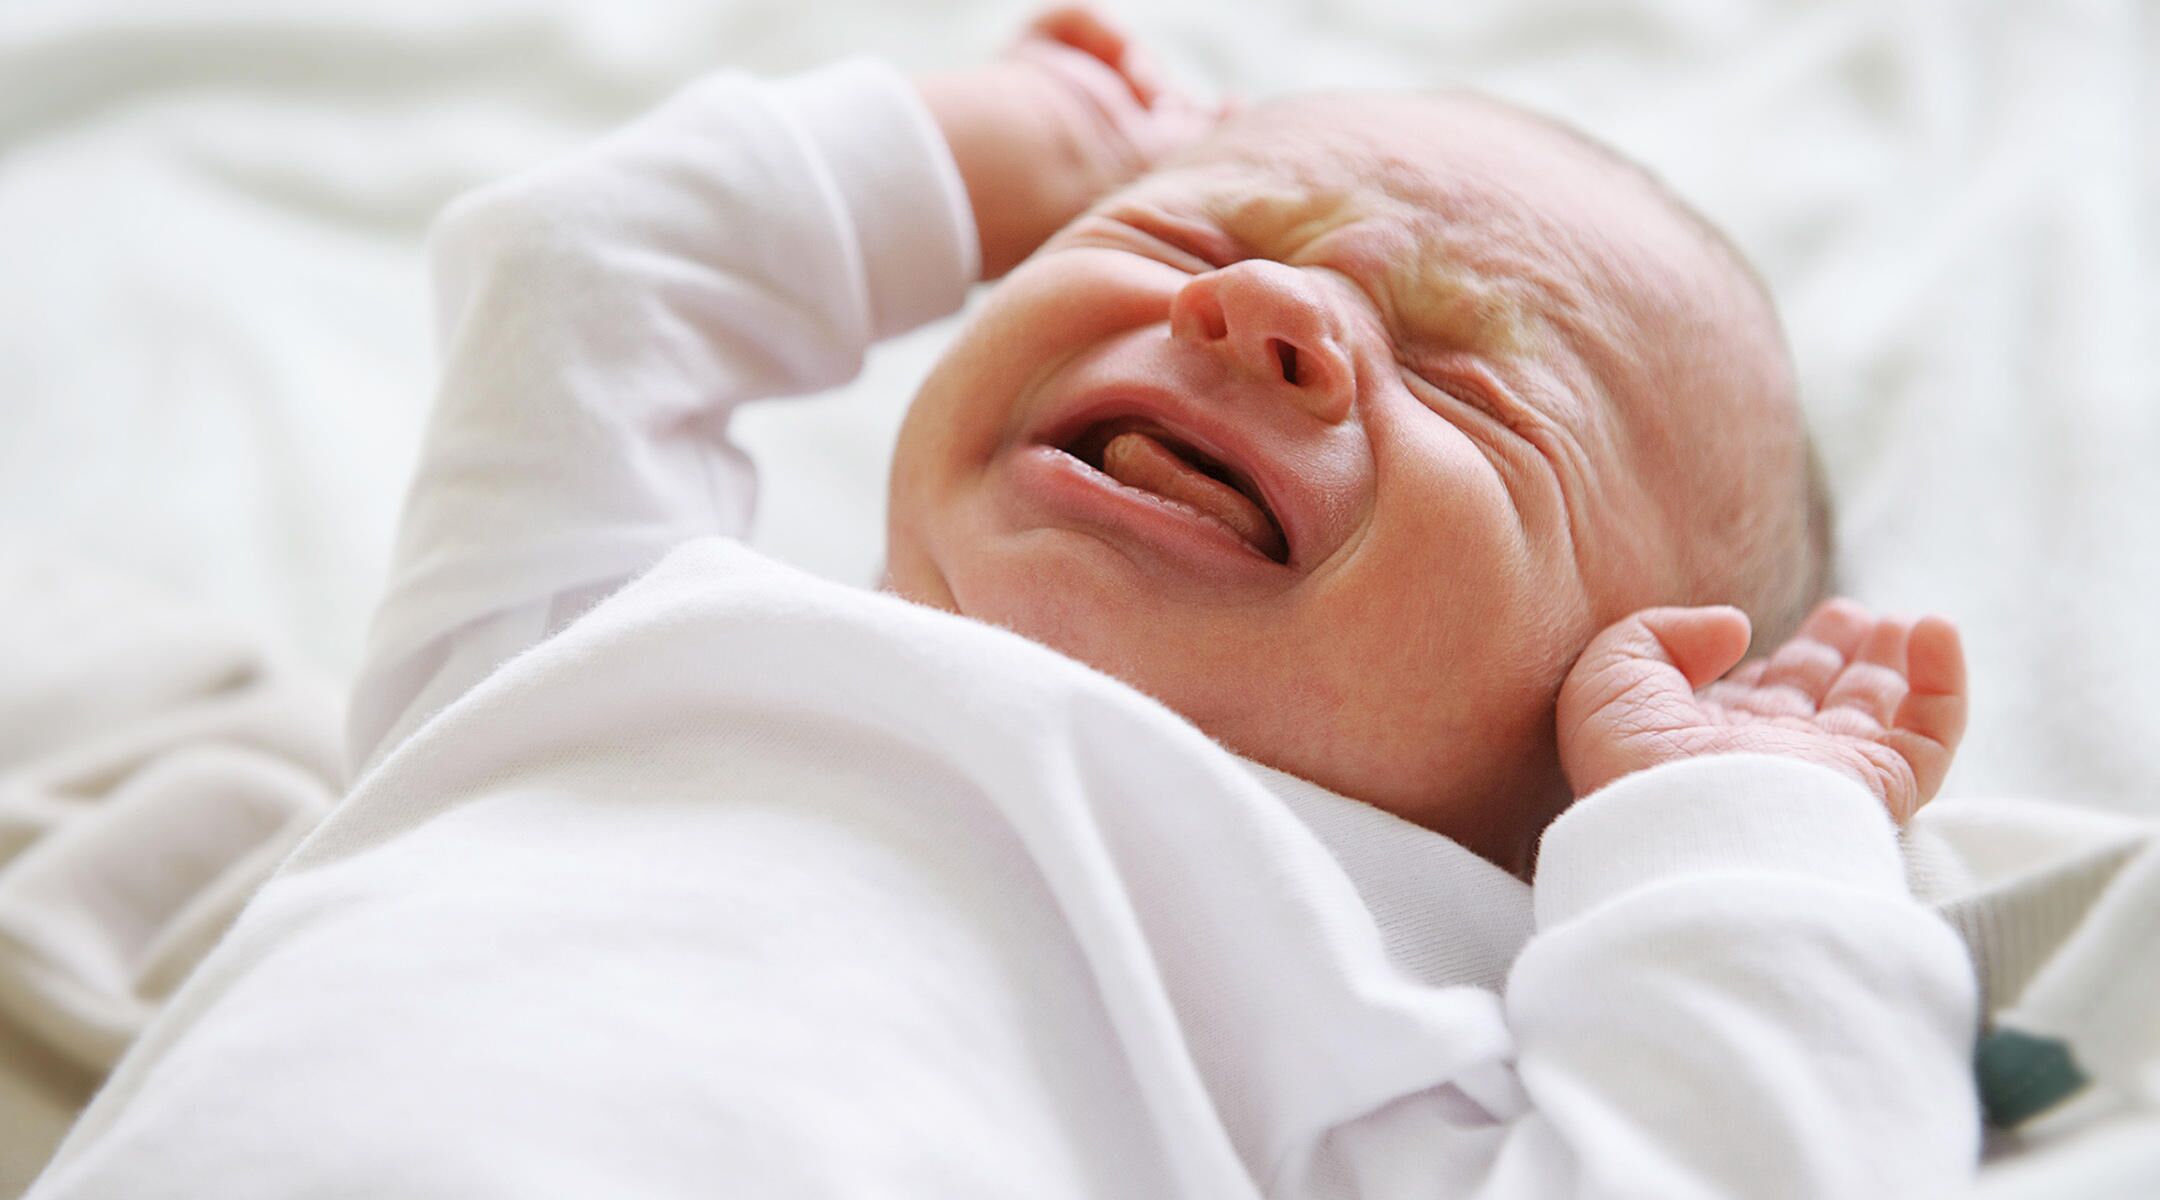 What Causes Colic in Babies? Symptoms, Remedies and More